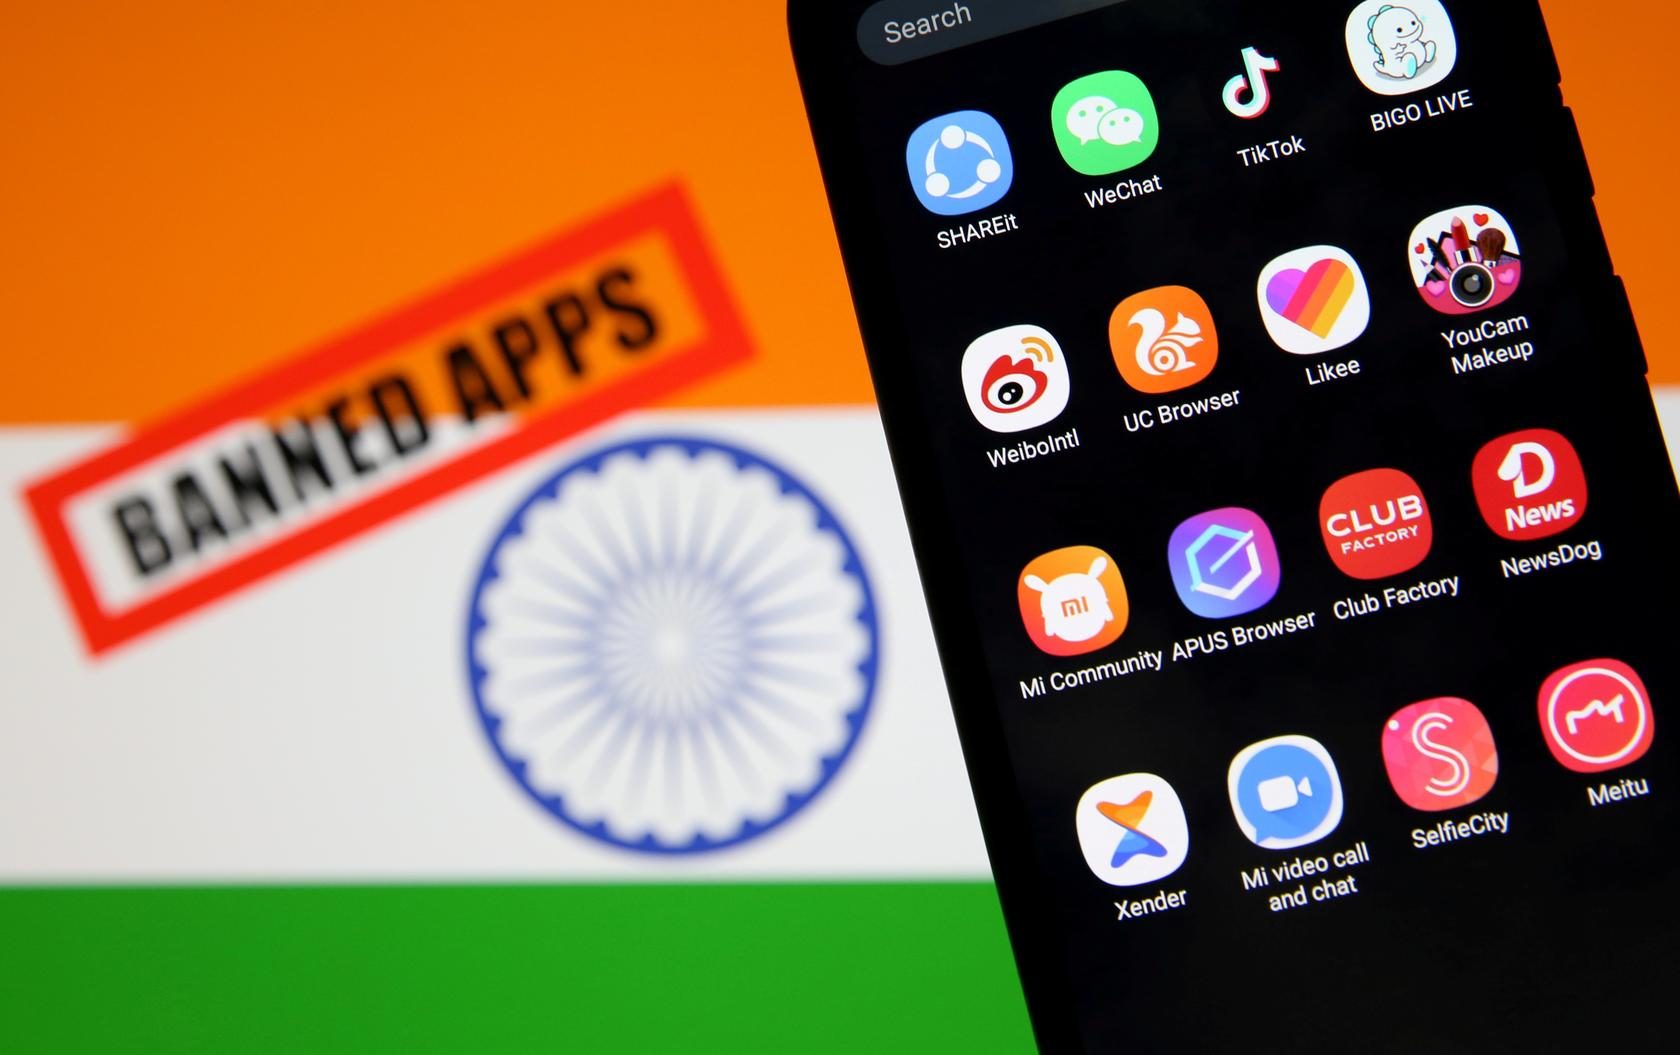 UCWeb lays off India staff, Club Factory halts payments after app ban